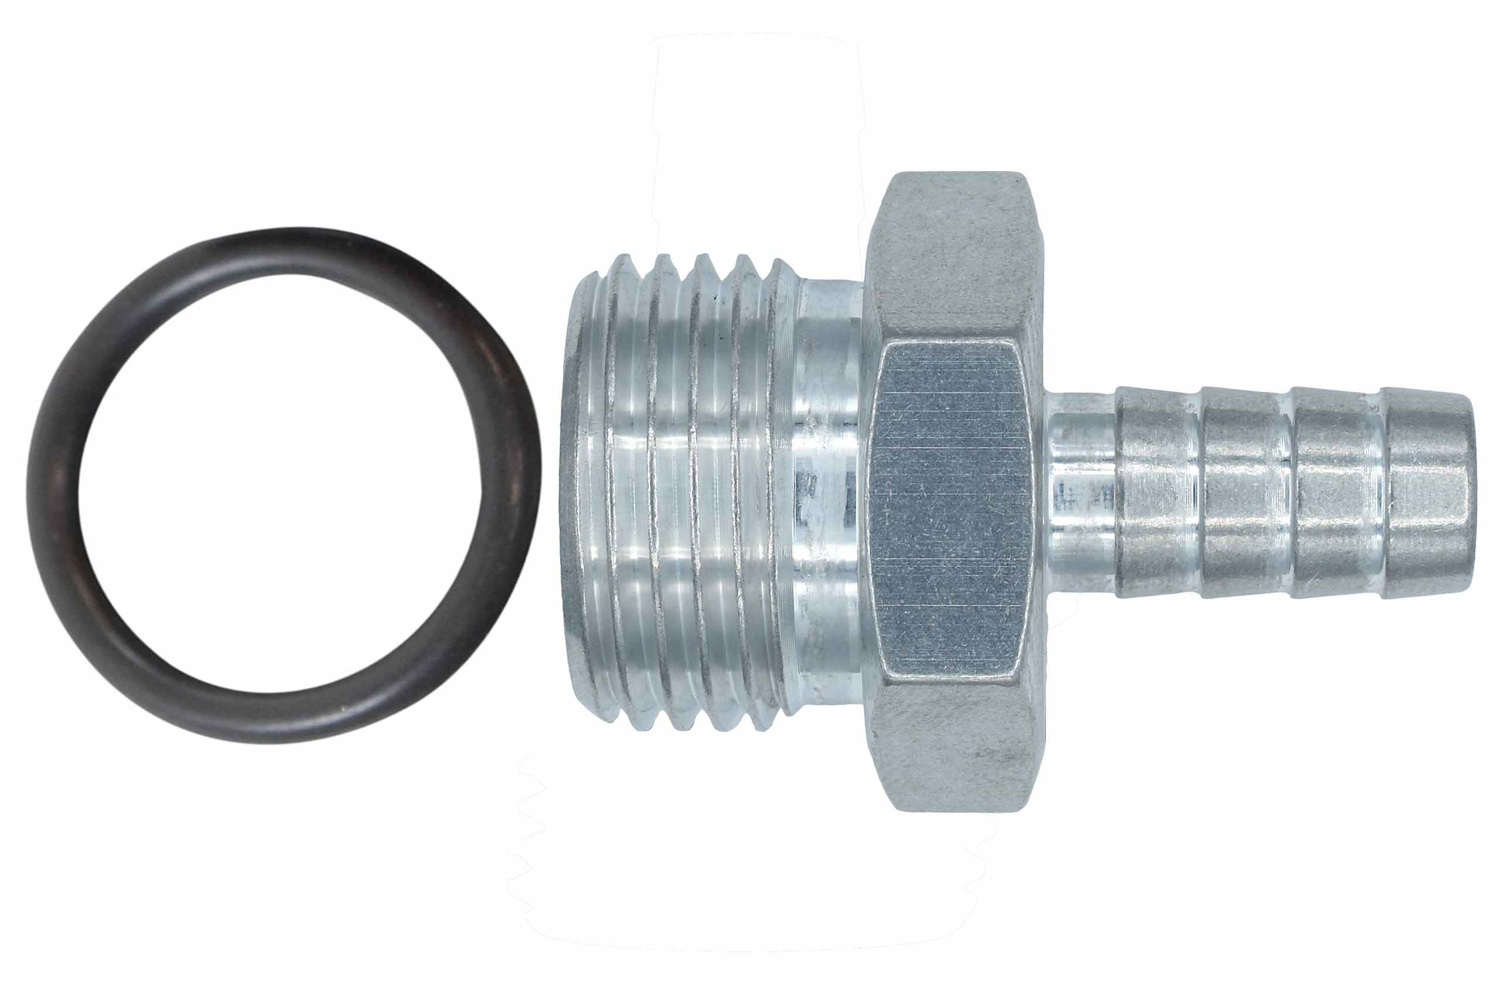 ICT Billet Hose Barb Fittings -10 AN O-ring  to 3/8 in. Hose Barb